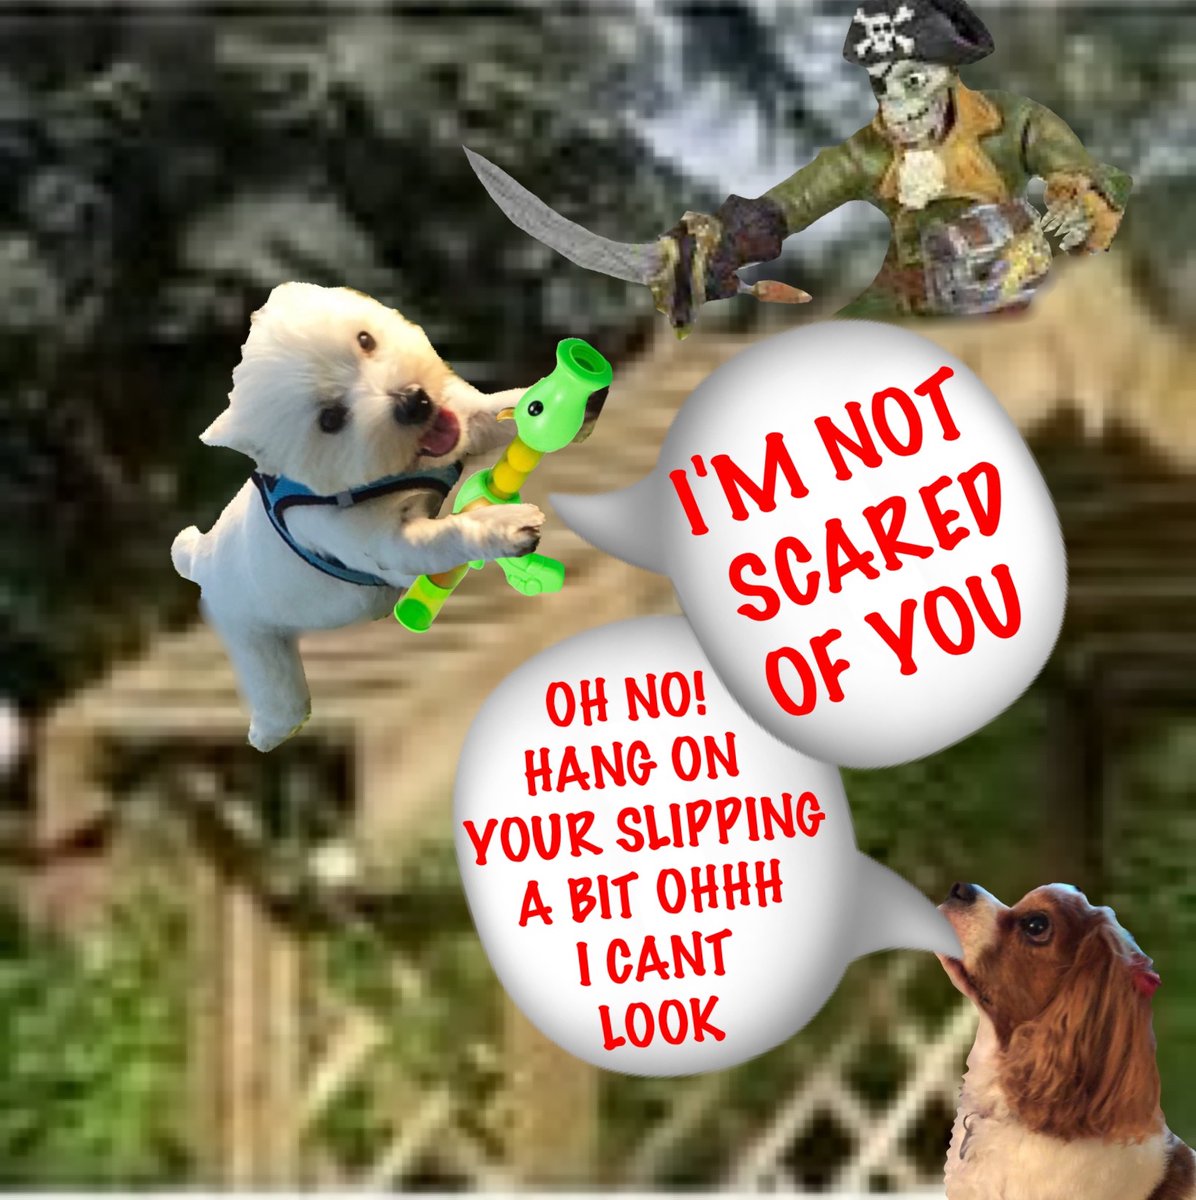 6 #zzst 🌺🌻🌹💐🌷🪻🪷🌸🌼🌺🌻🌹💐🌷🪻
OH NOOOOO......
PHEW HE GOT A GRIP JUST IN TIME TO FIRE..... 

PHEW SO GLAD HE DIDNT FALL OFF